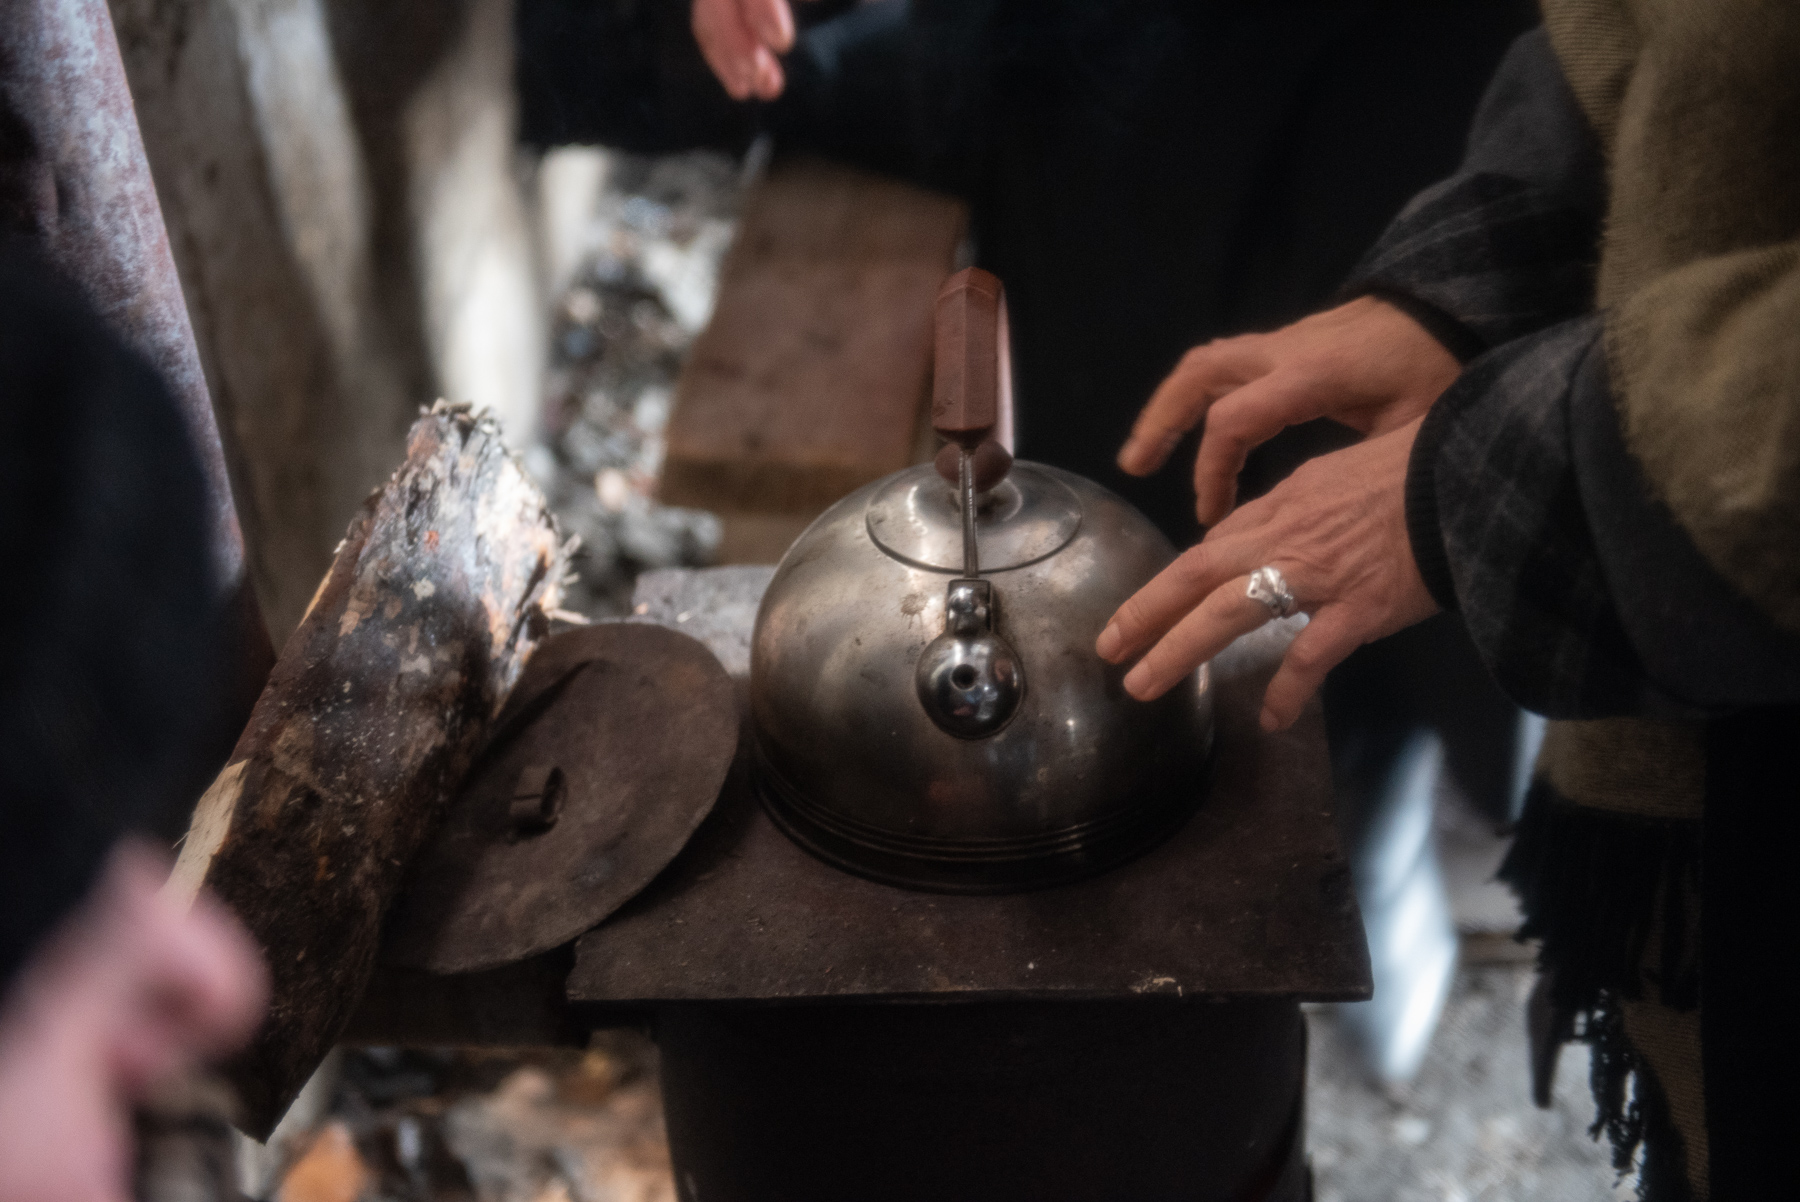 Protesters warming up at a wood burning stove in February 2020. Photo: Mariam Nikuradze/OC Media.